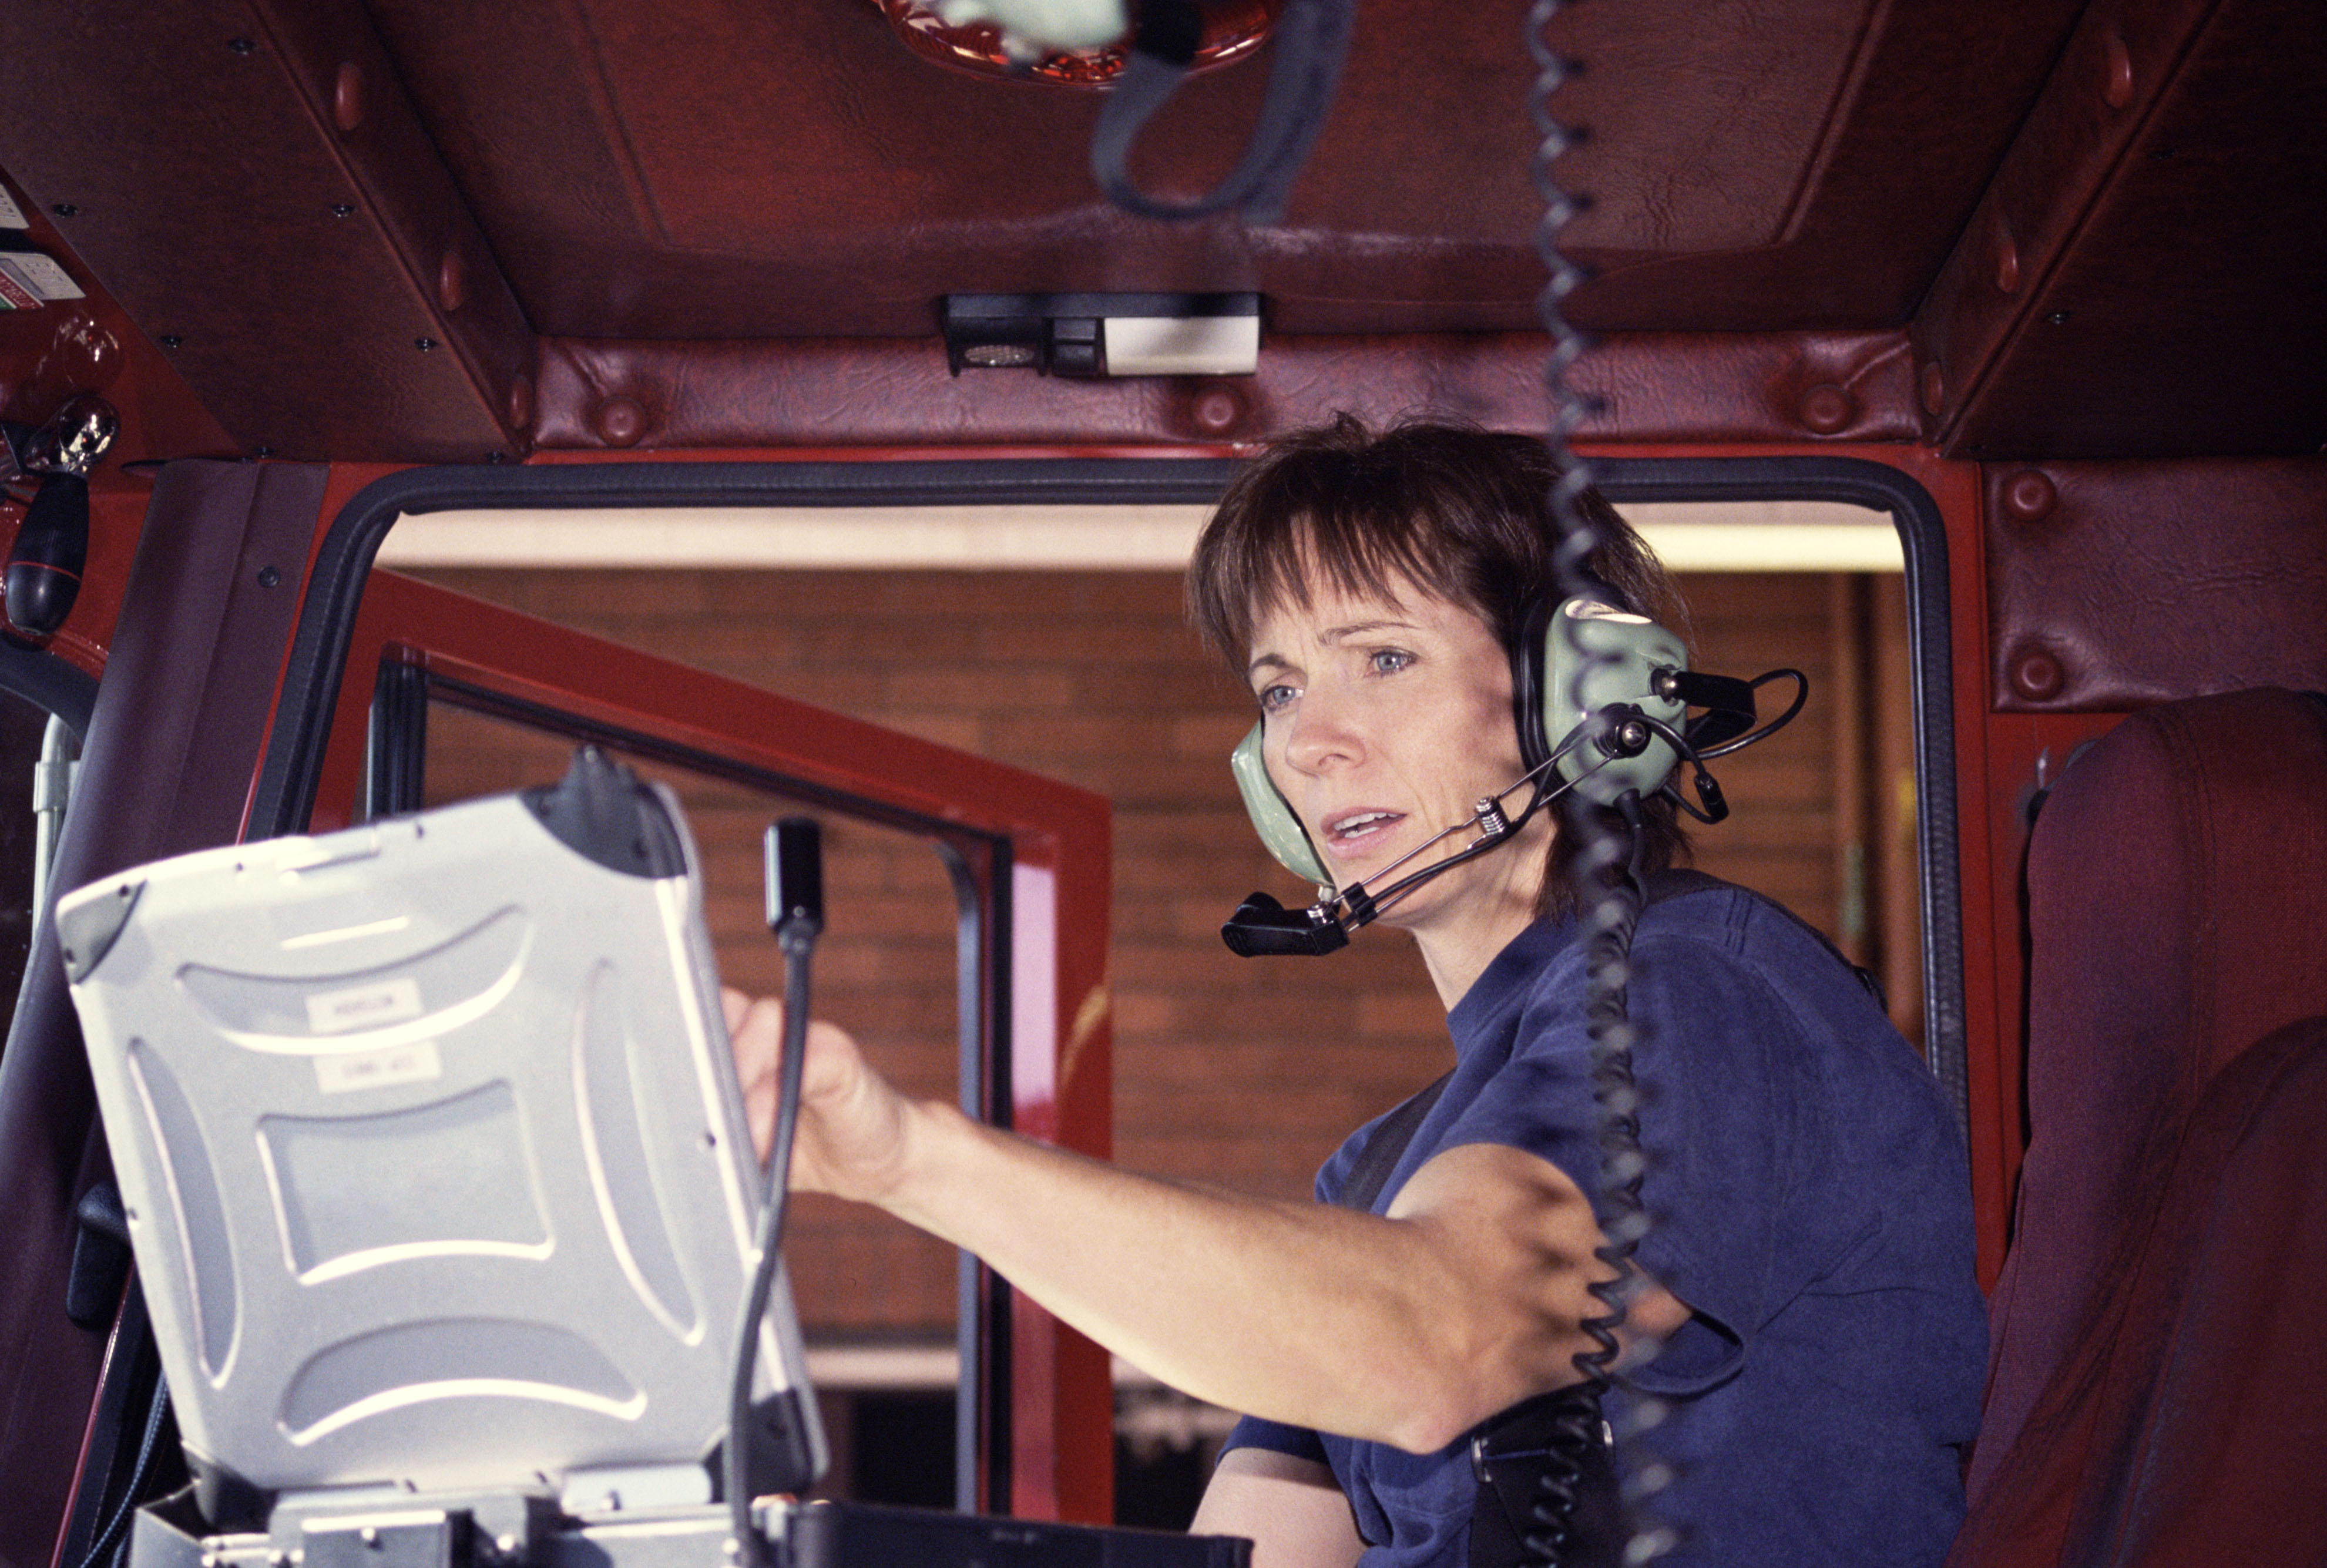 A 911 dispatcher answers the call | Source: Getty Images